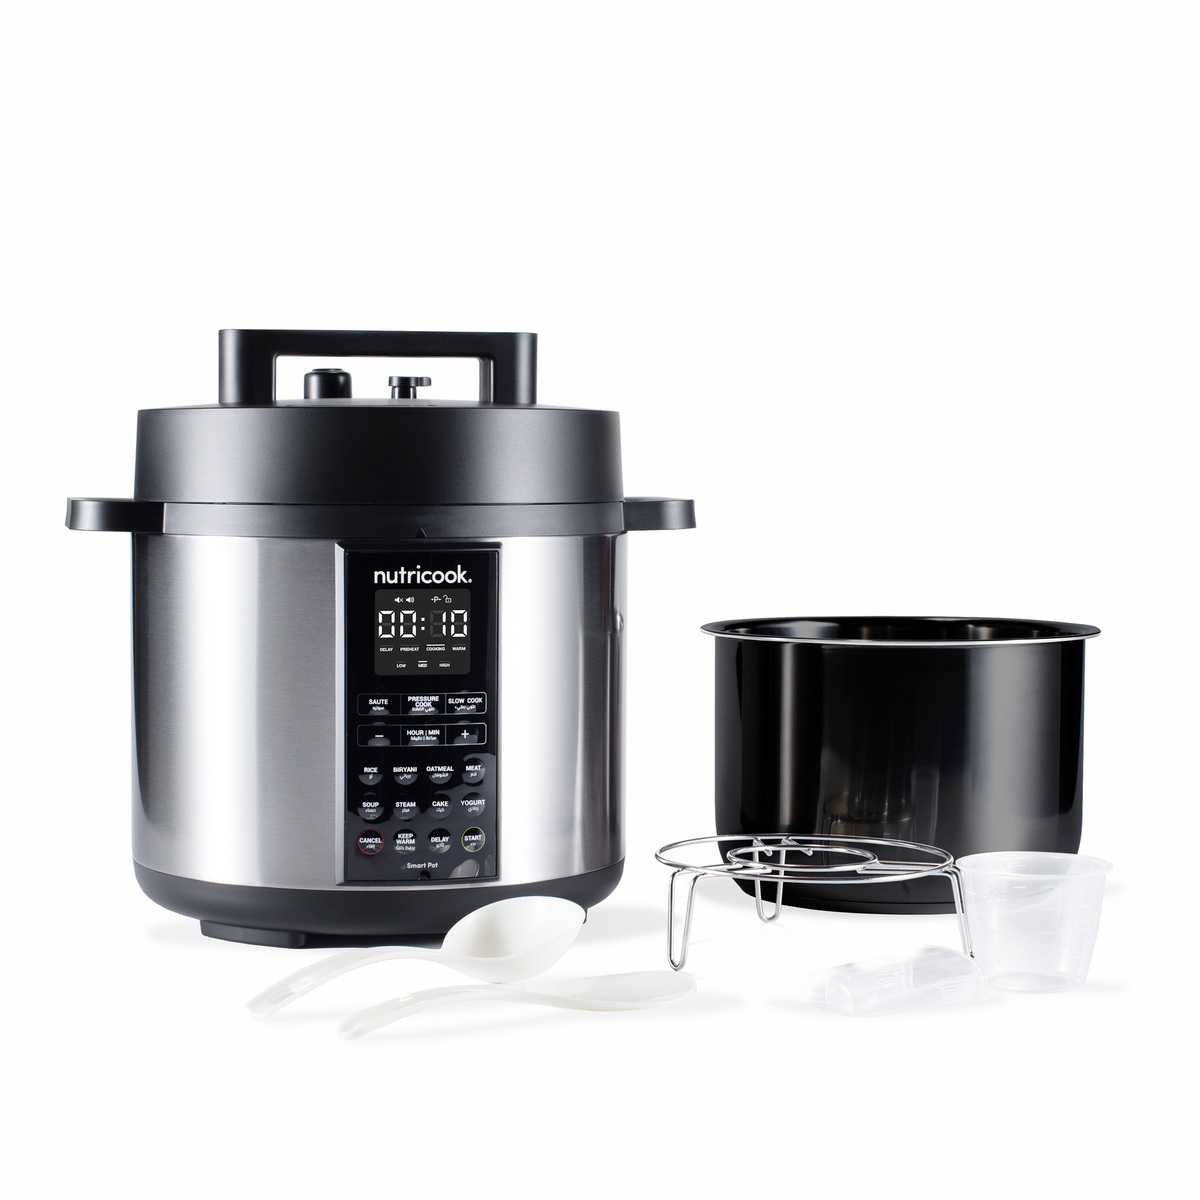 Nutricook Smart Pot 2, 9 in 1 Electric Pressure Cooker, 8 L, 1200 W, 12 Smart Programs, Stainless Steel, NC-SP208A